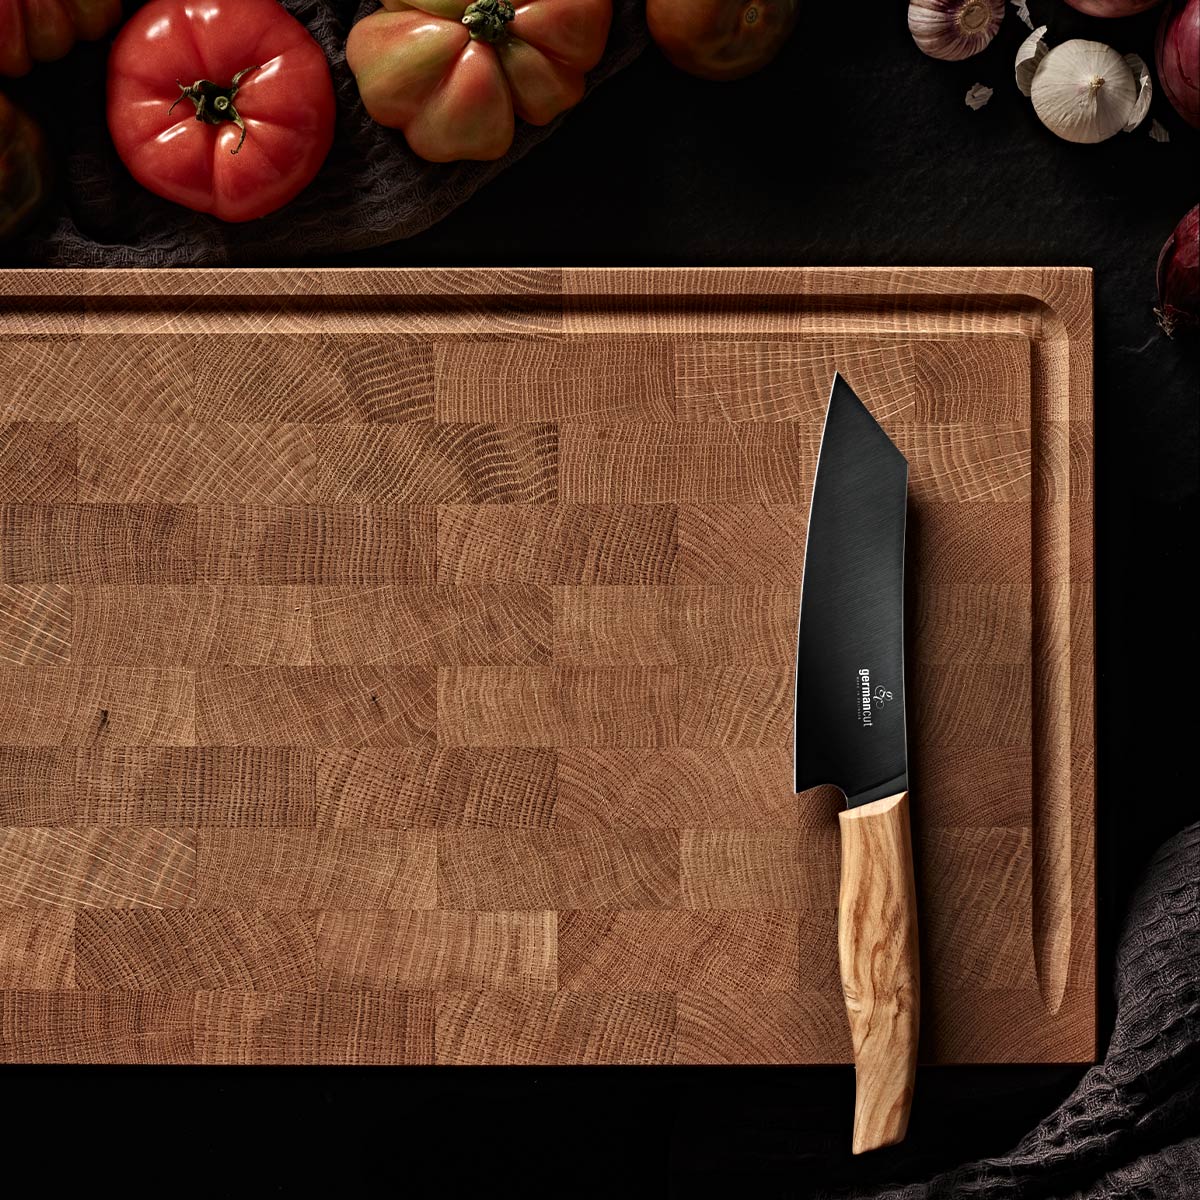 Which cutting board is perfect for your chef's knife?